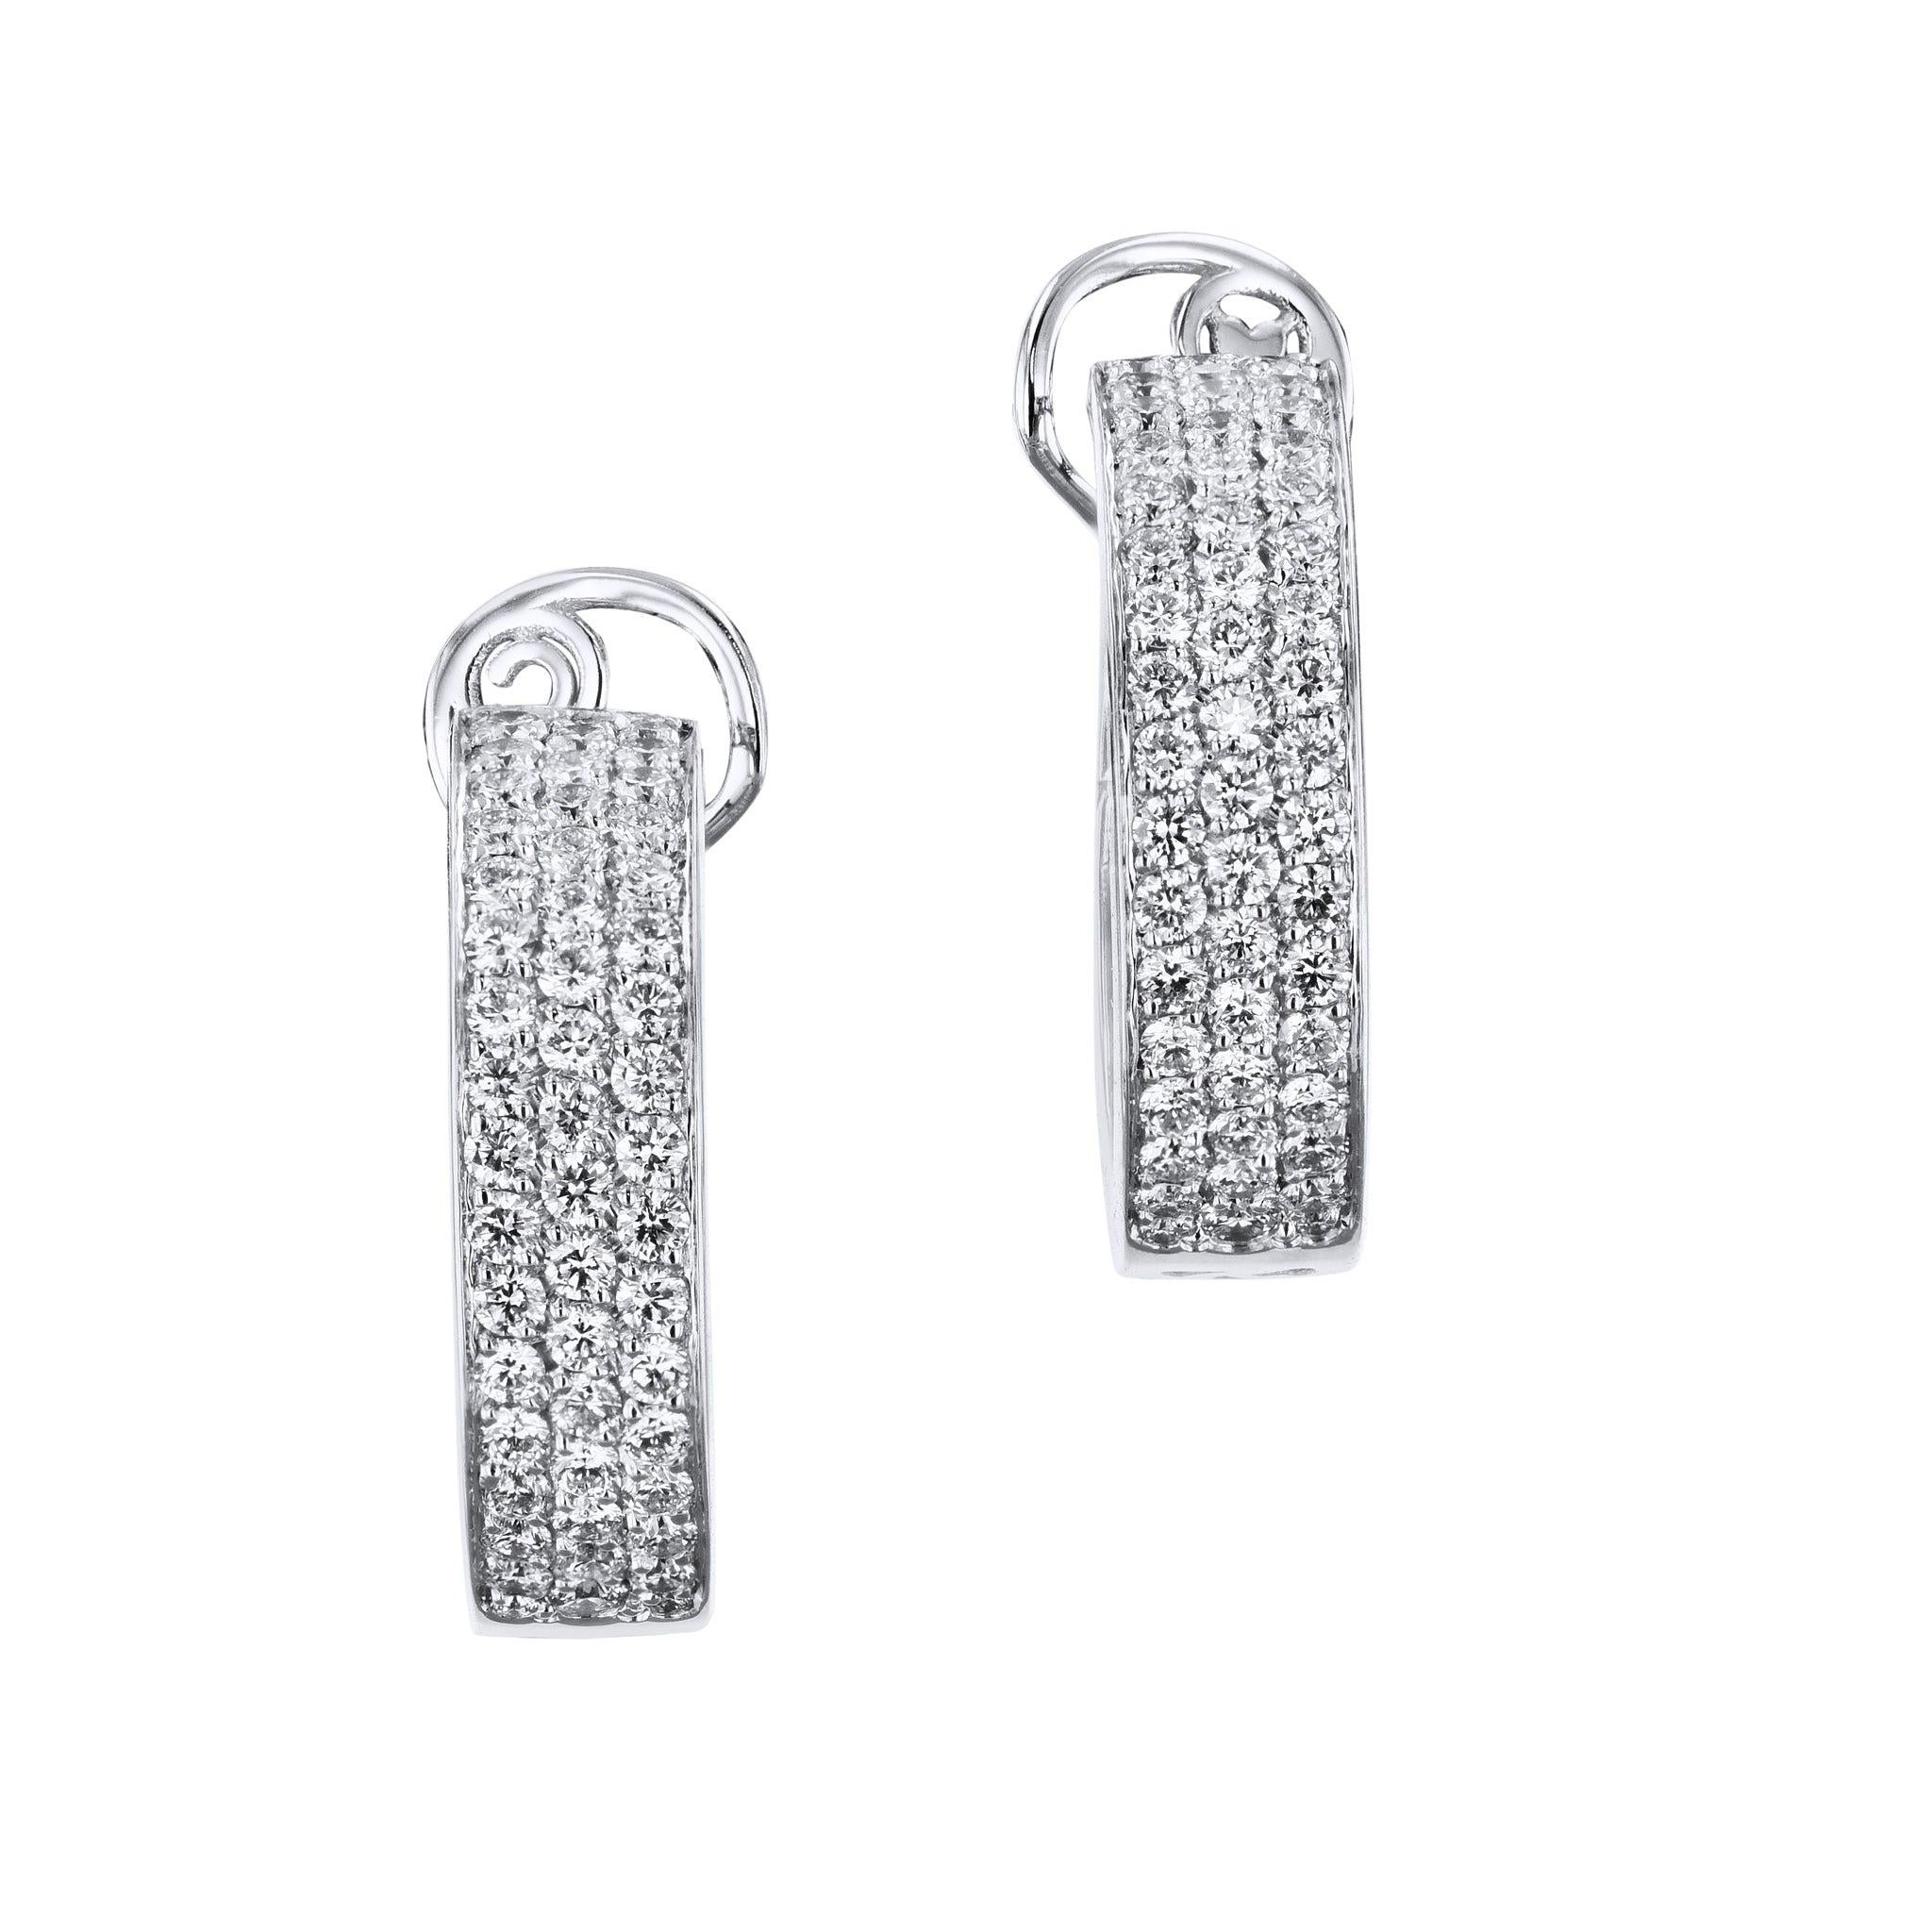 Gorgeous 18 Kt White Gold Hoop Drop Earrings ignite with fiery diamond pave. Feel luxurious in these luxurious Inside-Out hoops and turn heads everywhere you go!.
White Gold Diamond Pave Inside-Out Hoop Earrings.
18kt.  White Gold. 
Hoop Drop